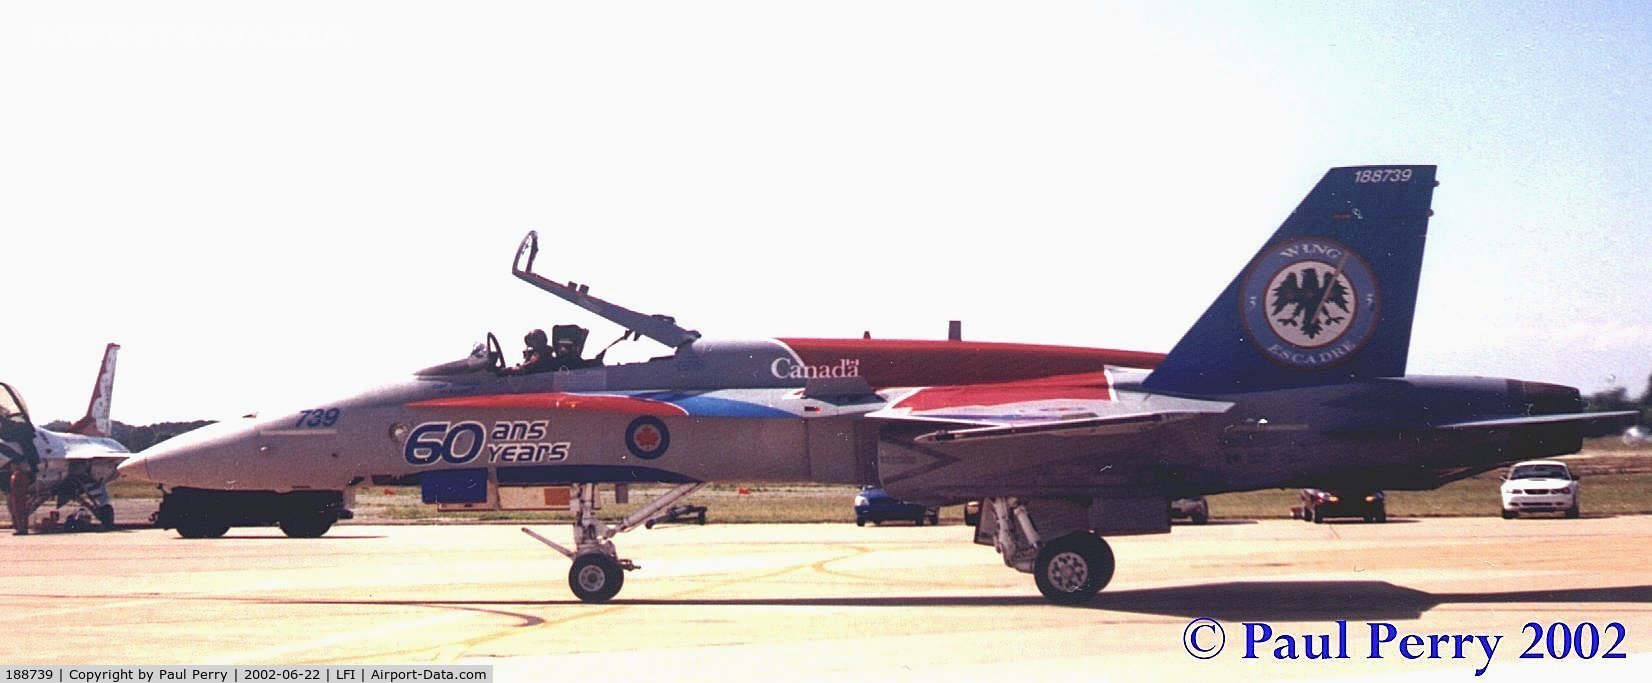 188739, McDonnell Douglas CF-188A Hornet C/N 0284/A229, Closer view of the RCAF Hornet's special colors